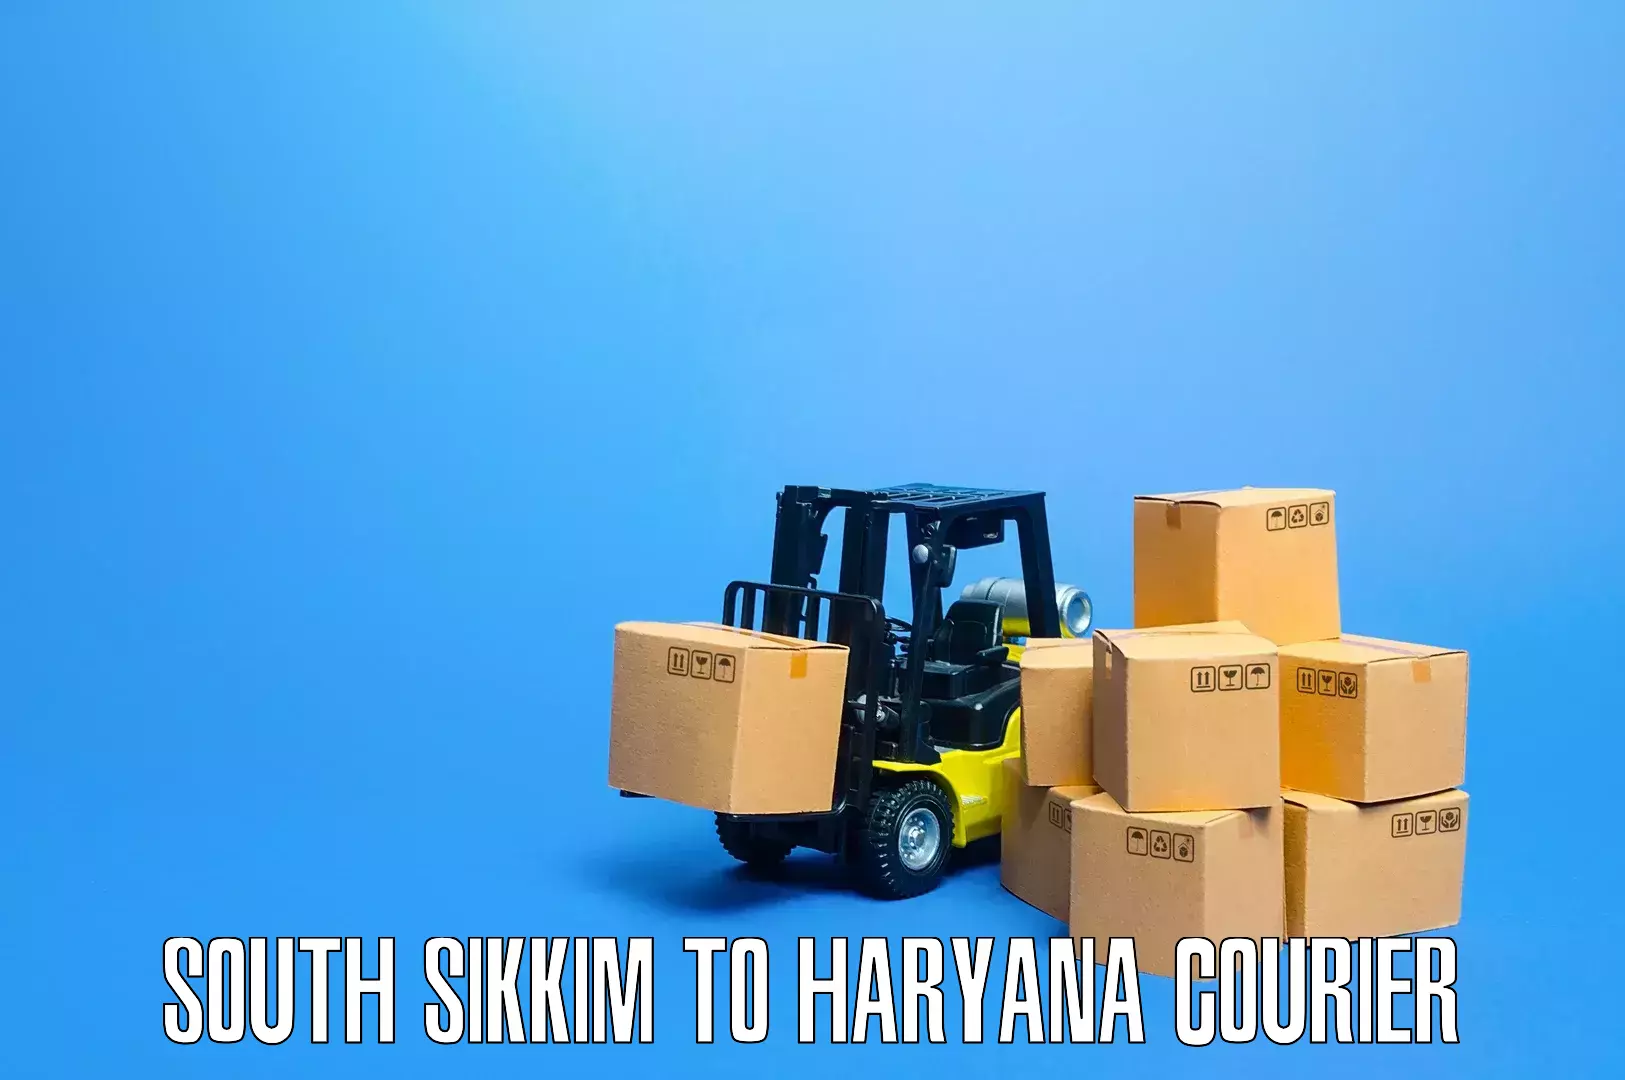 Furniture transport experts in South Sikkim to NCR Haryana